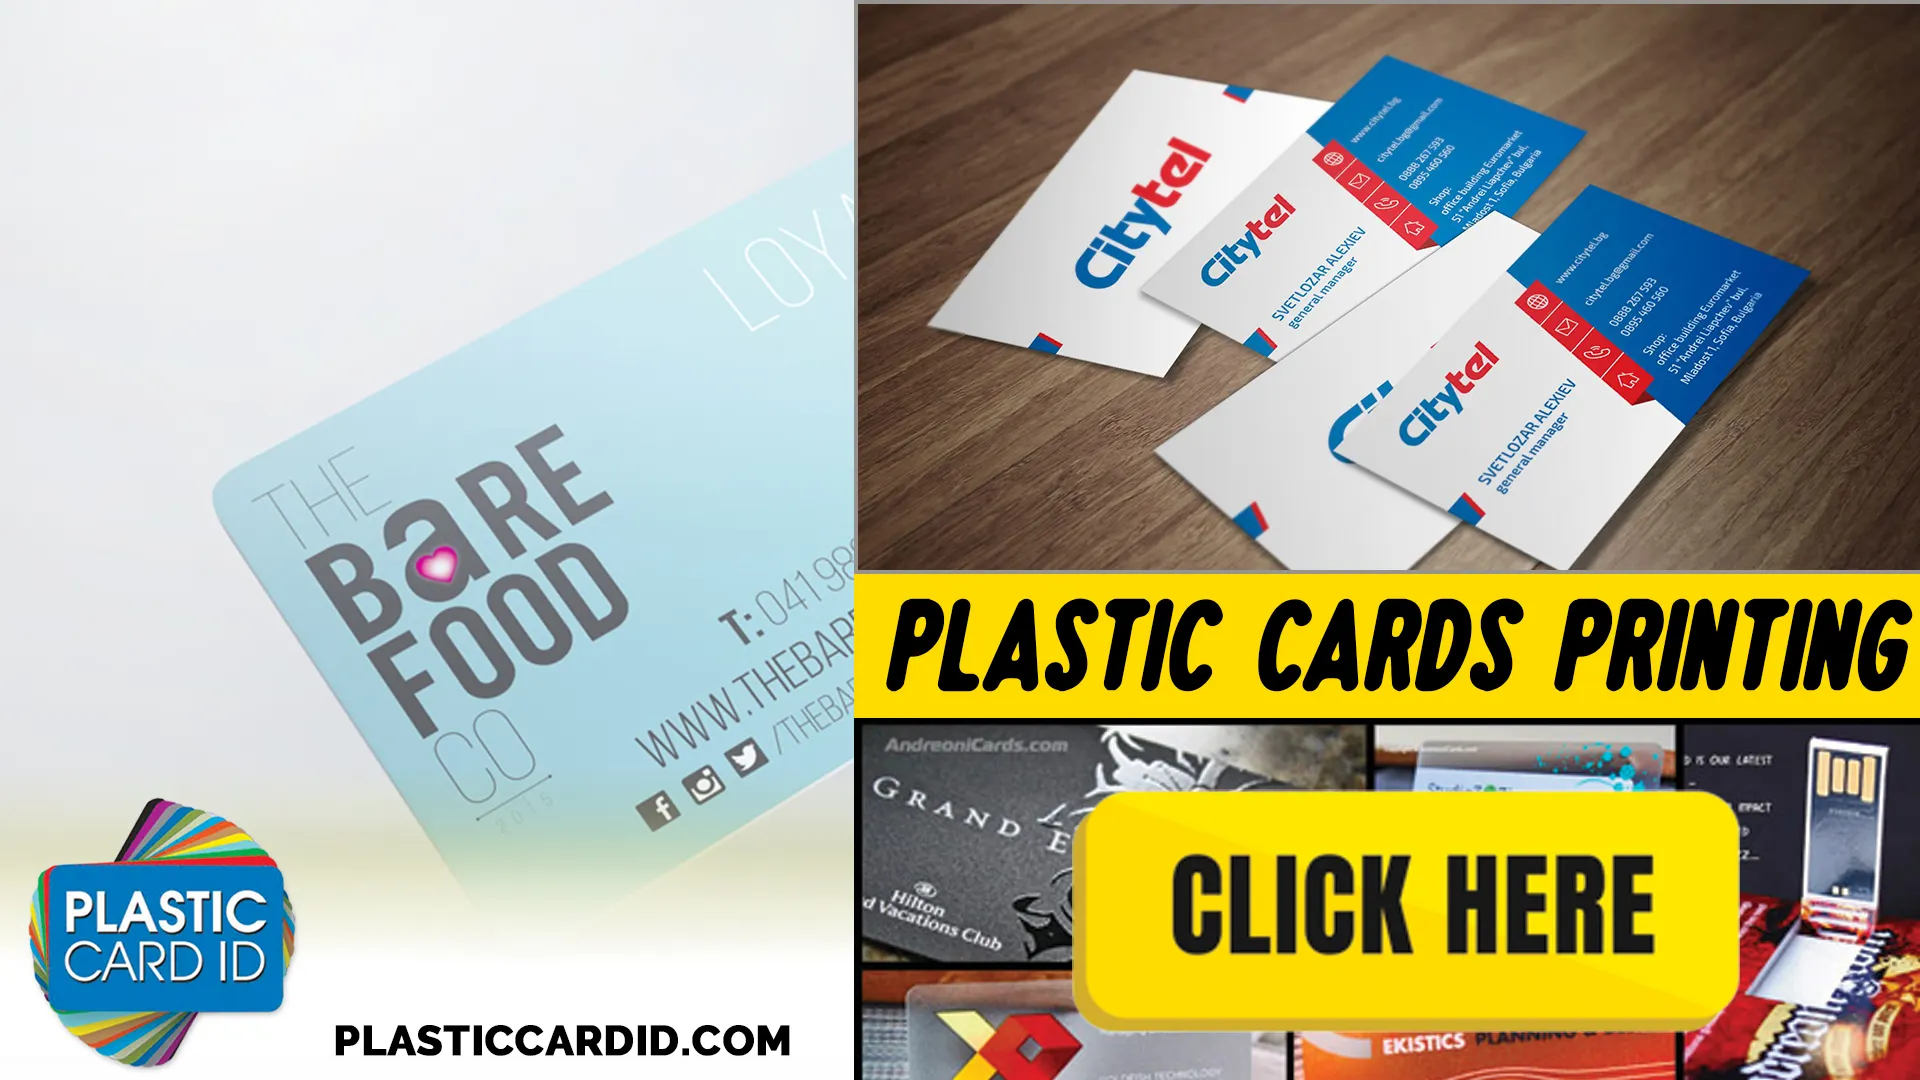 Boost Your Brand with Plastic Card ID
's Innovative Features